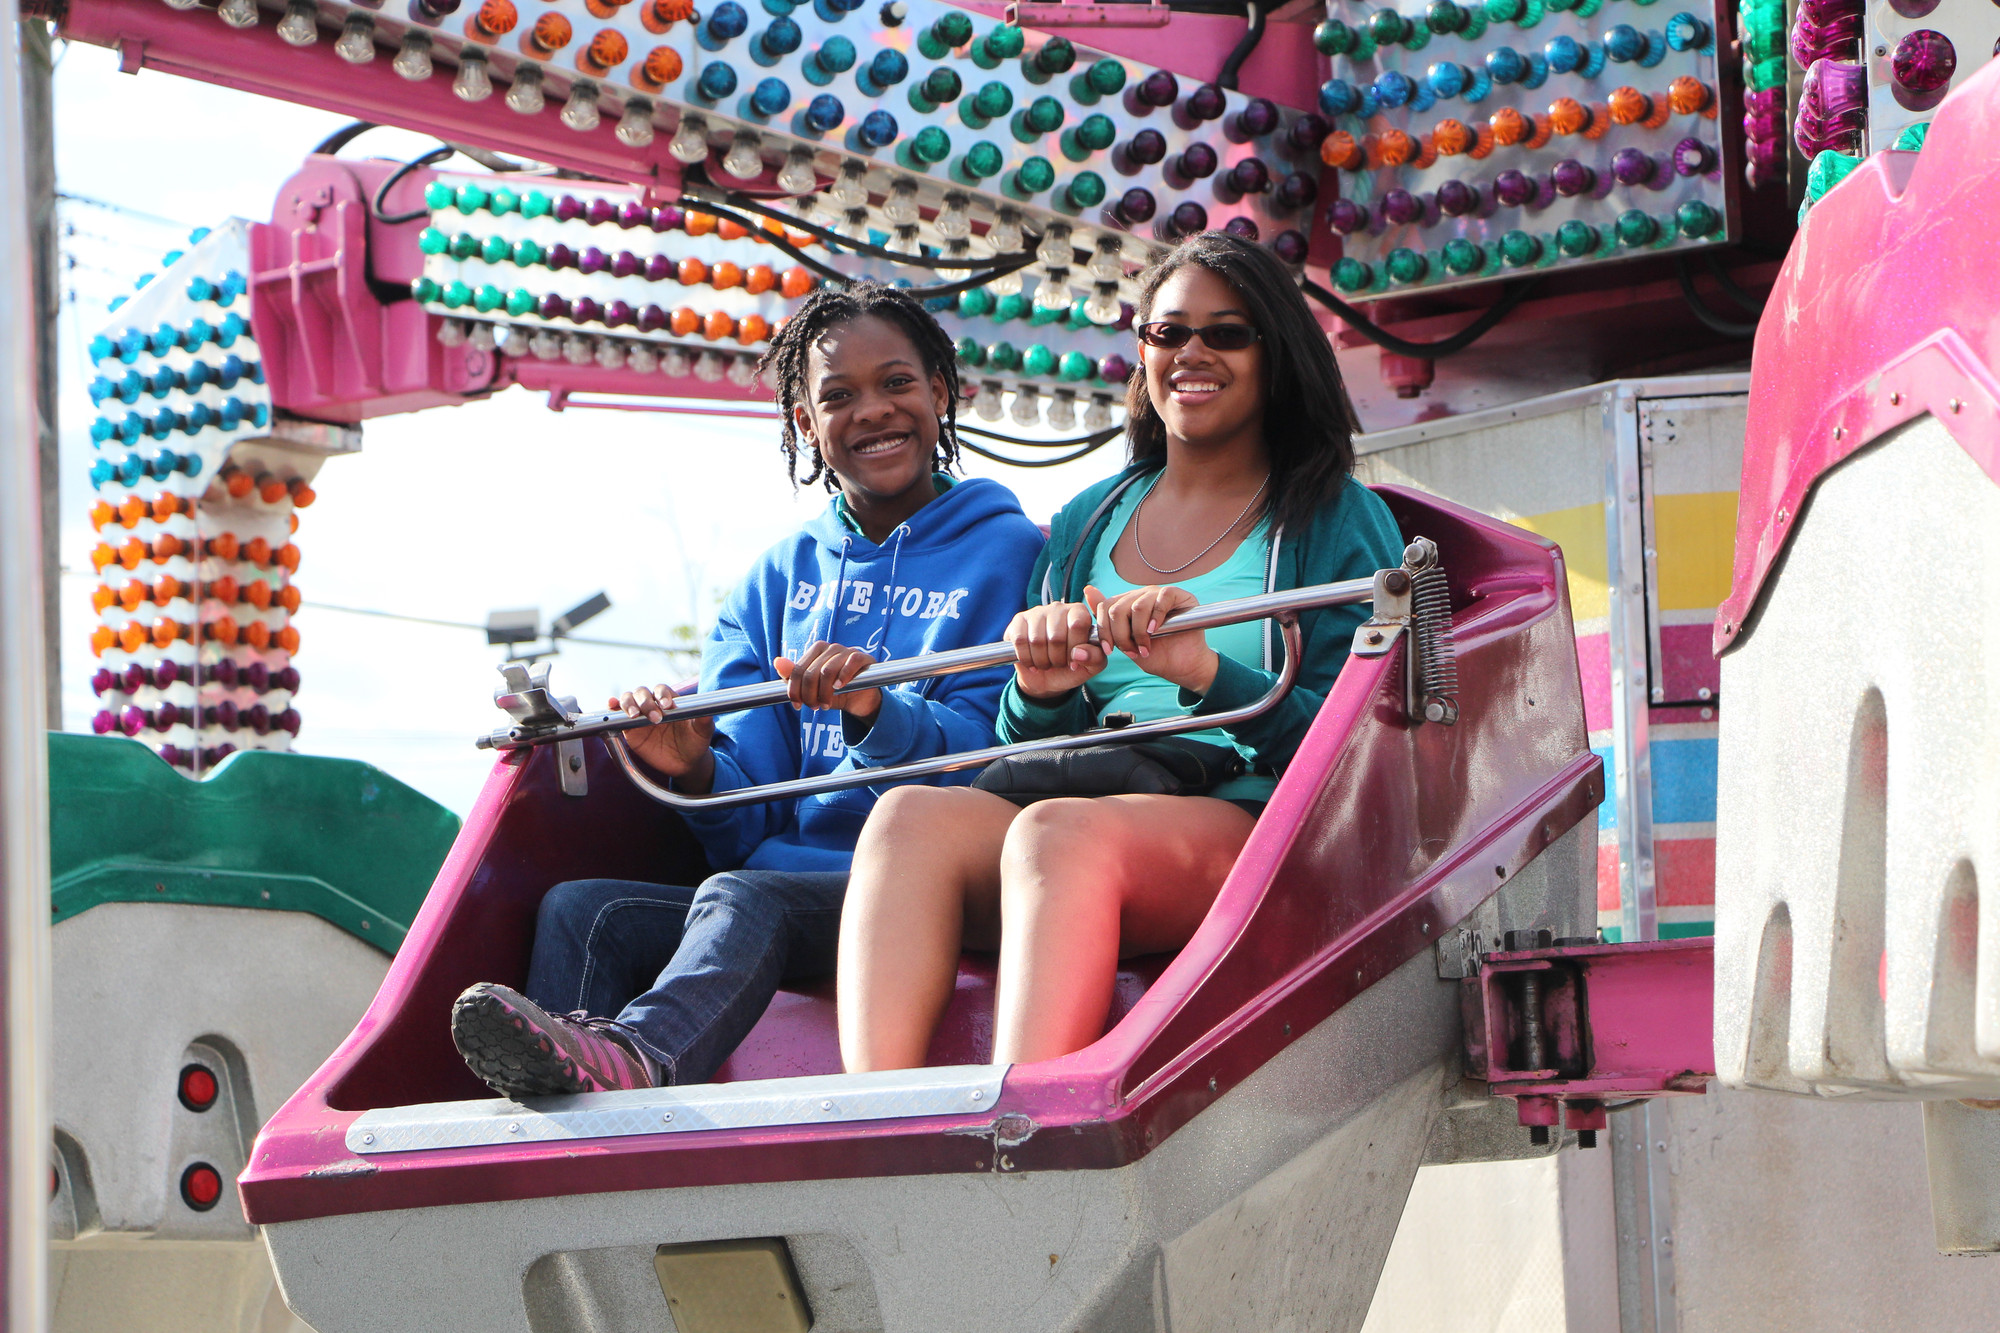 Mia Jean-Louis, 14, left, and Joelle Nicolas, 14, took a ride on the Twister last weekend under sunny skies.